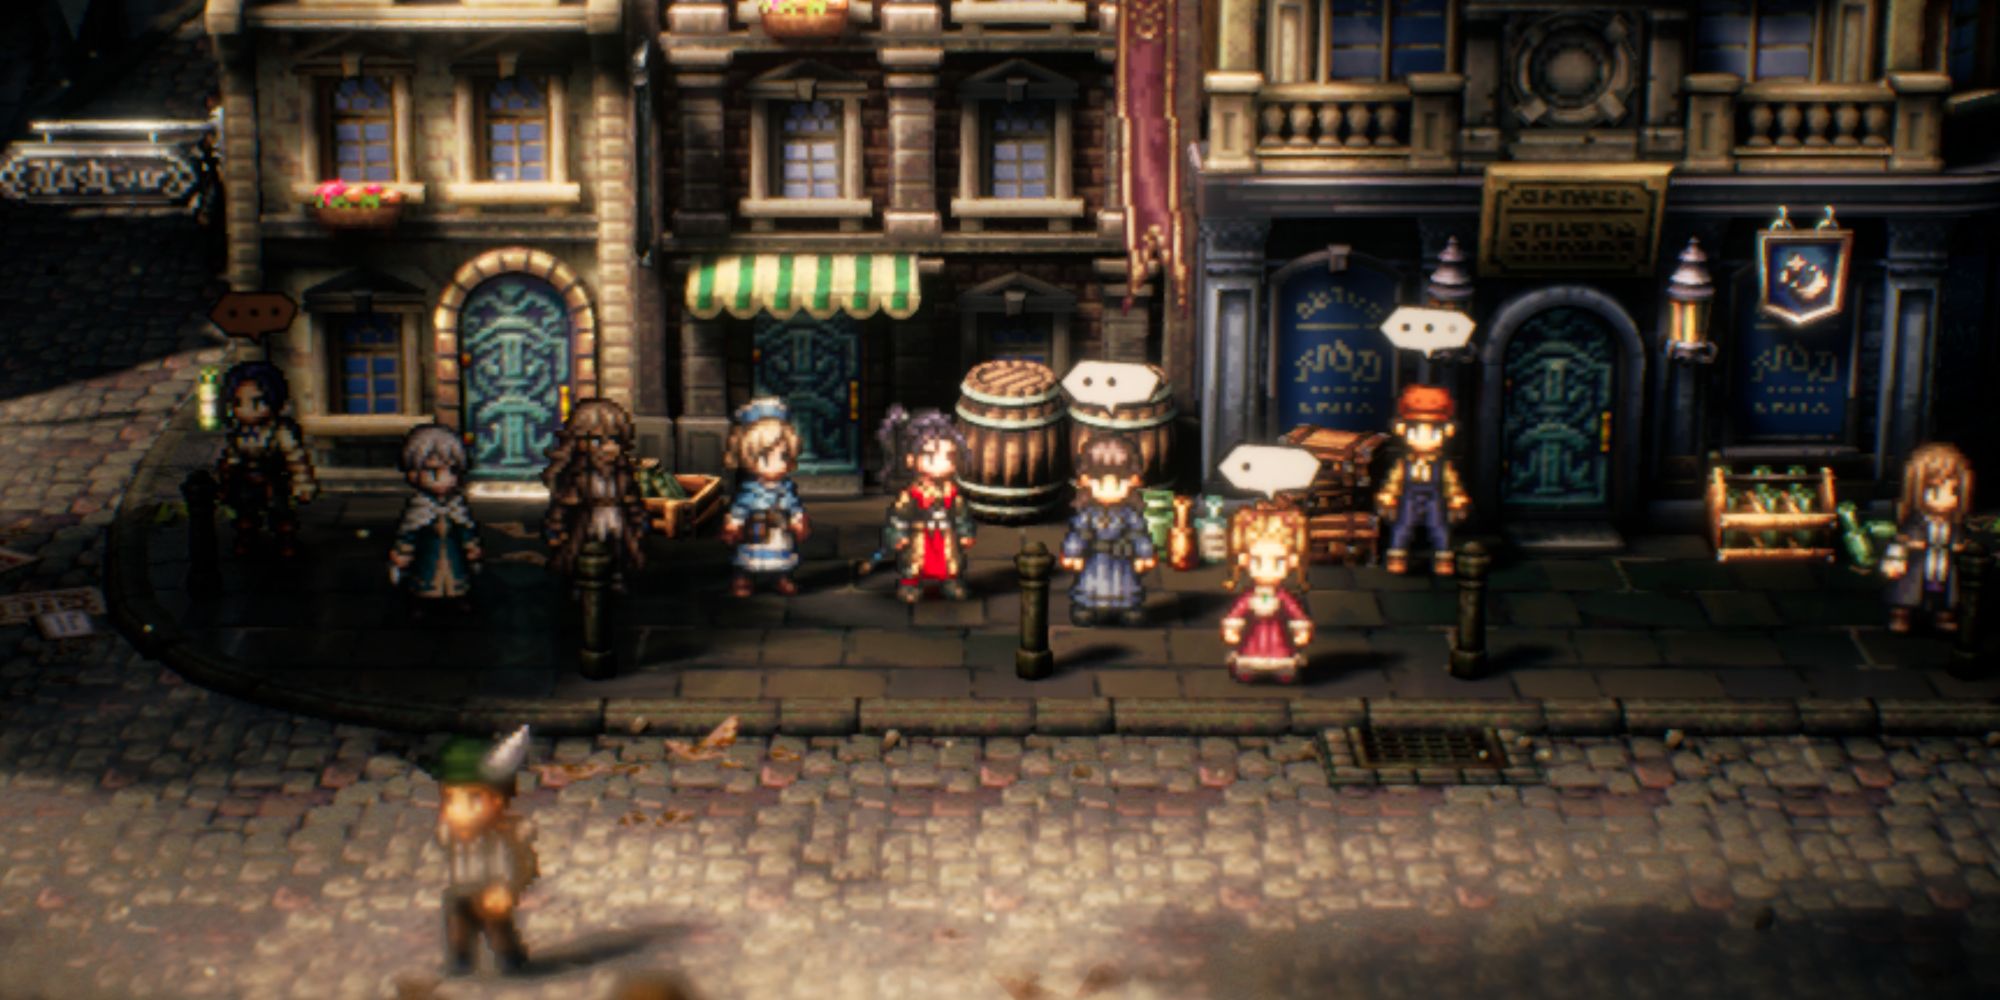 Octopath Traveler 2, Hikari about to challenge the Tutor in New Delsta